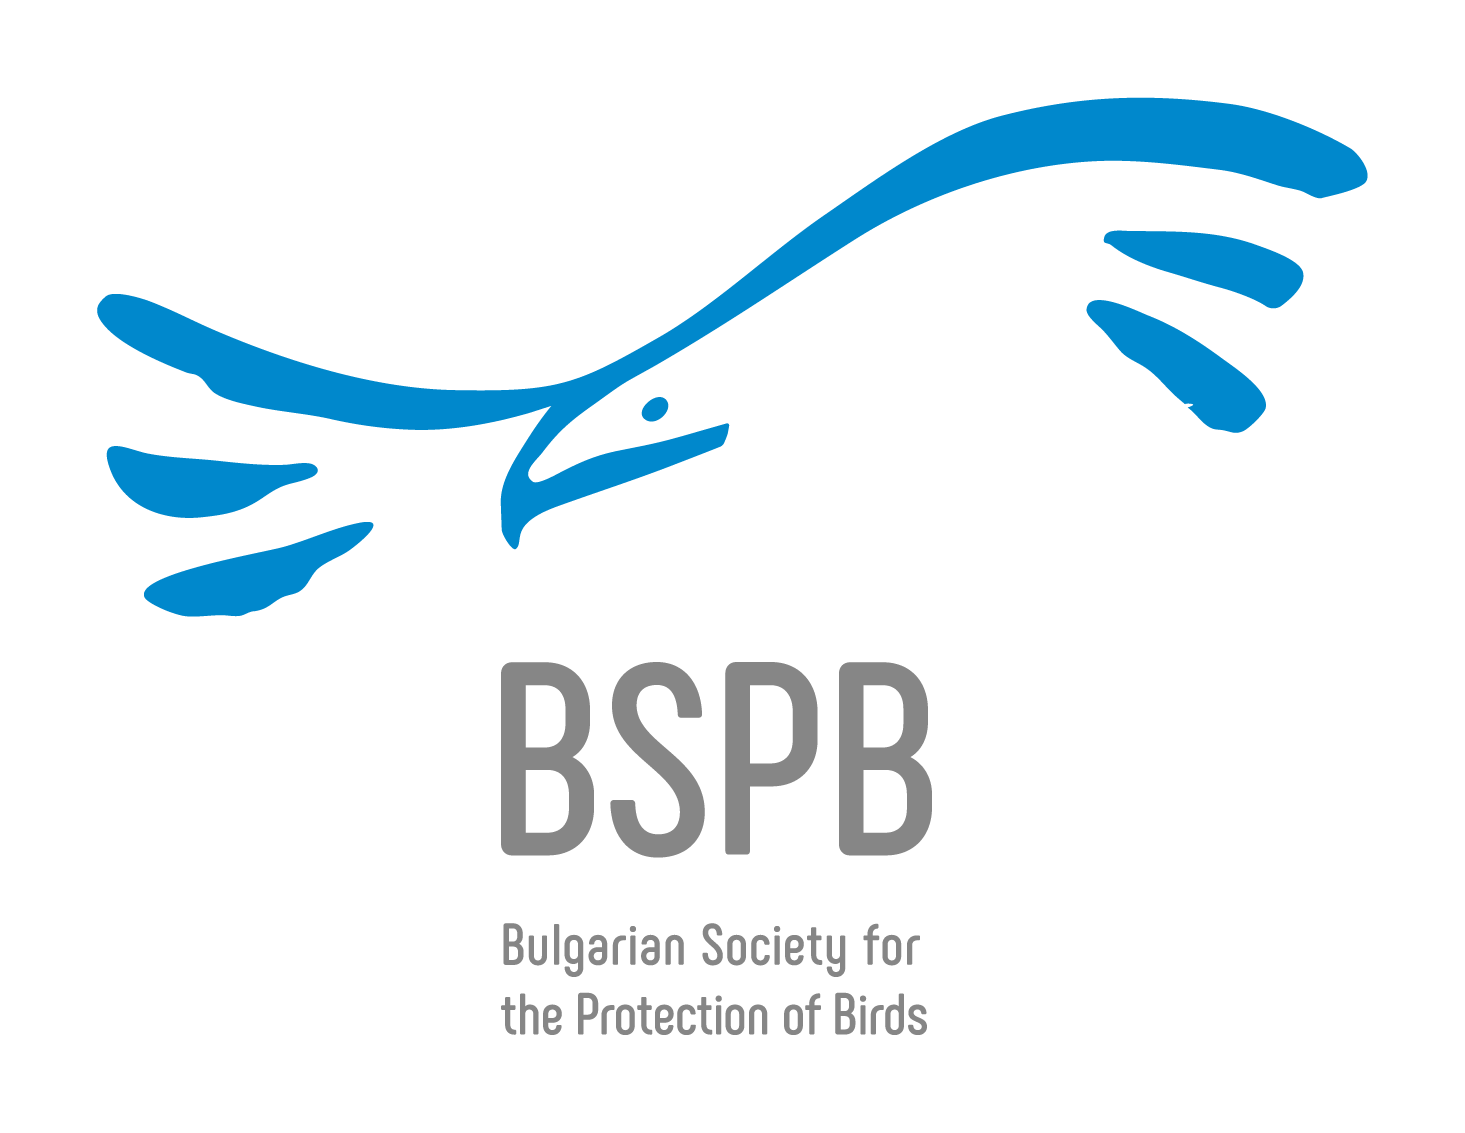 Official logo of the Bulgarian Society for the Protection of Birds